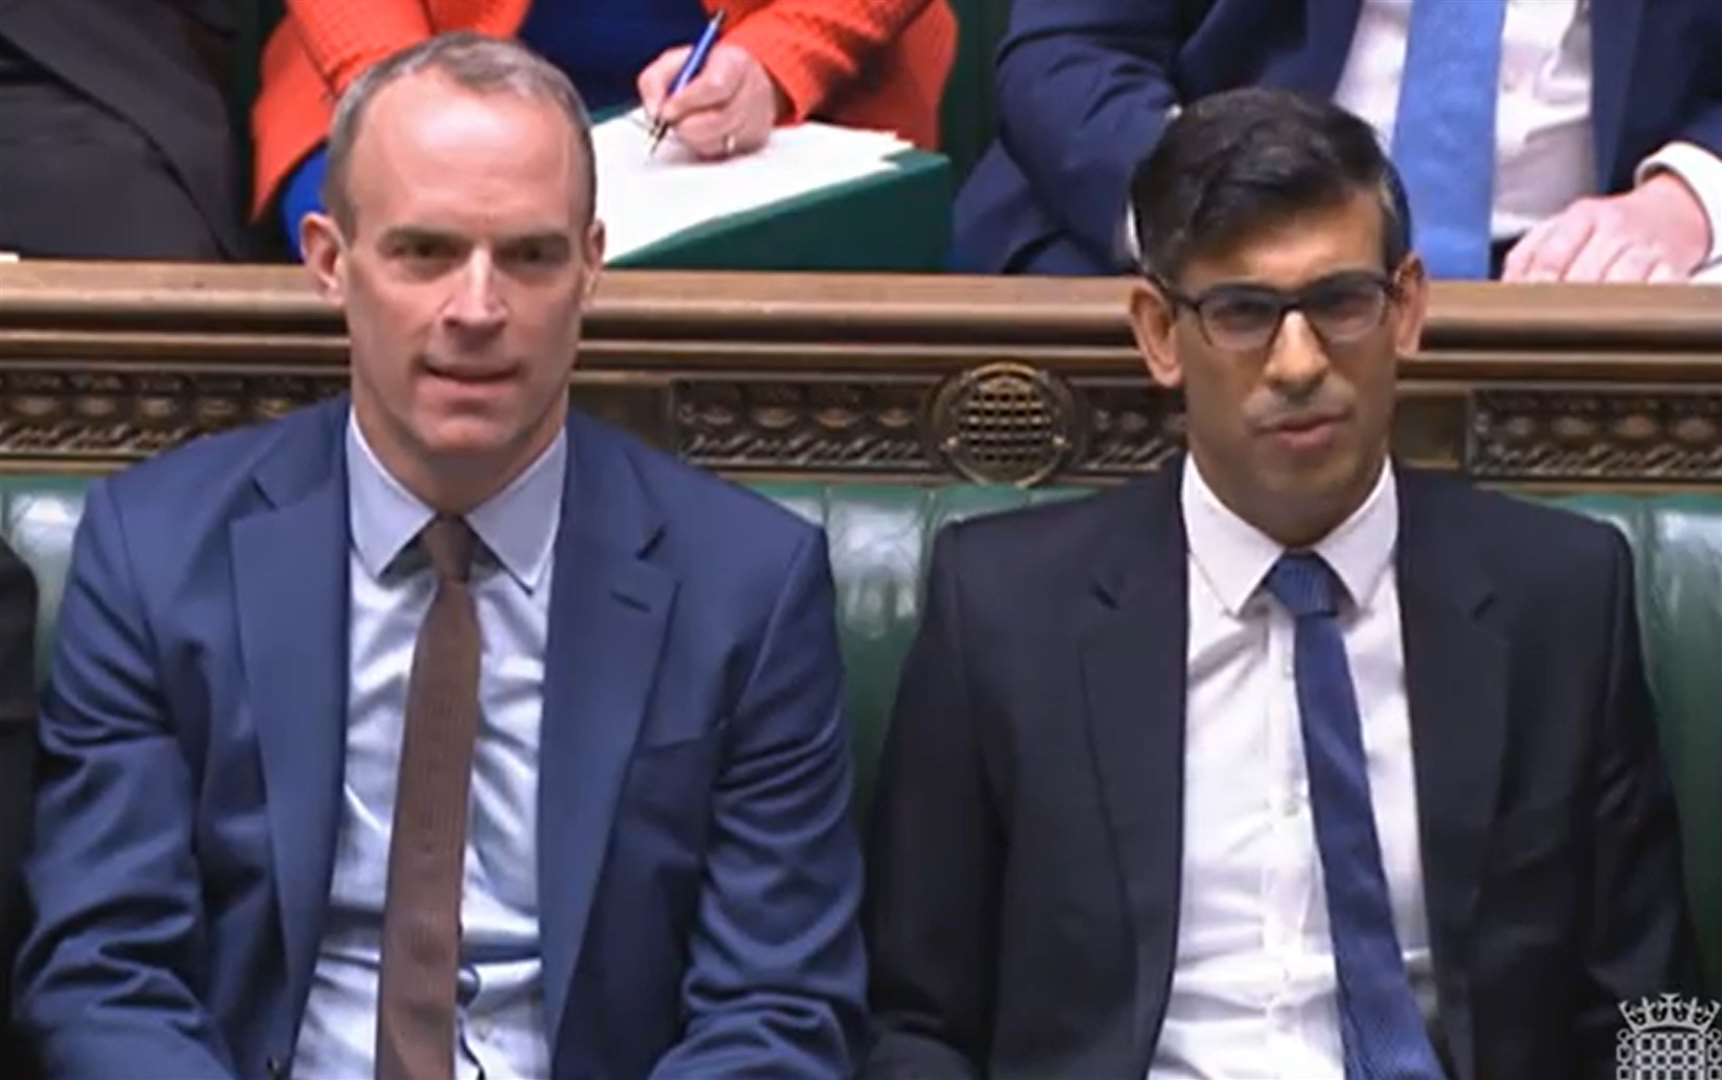 Rishi Sunak said had accepted Dominic Raab’s resignation with ‘great sadness’ (Commons/PA)